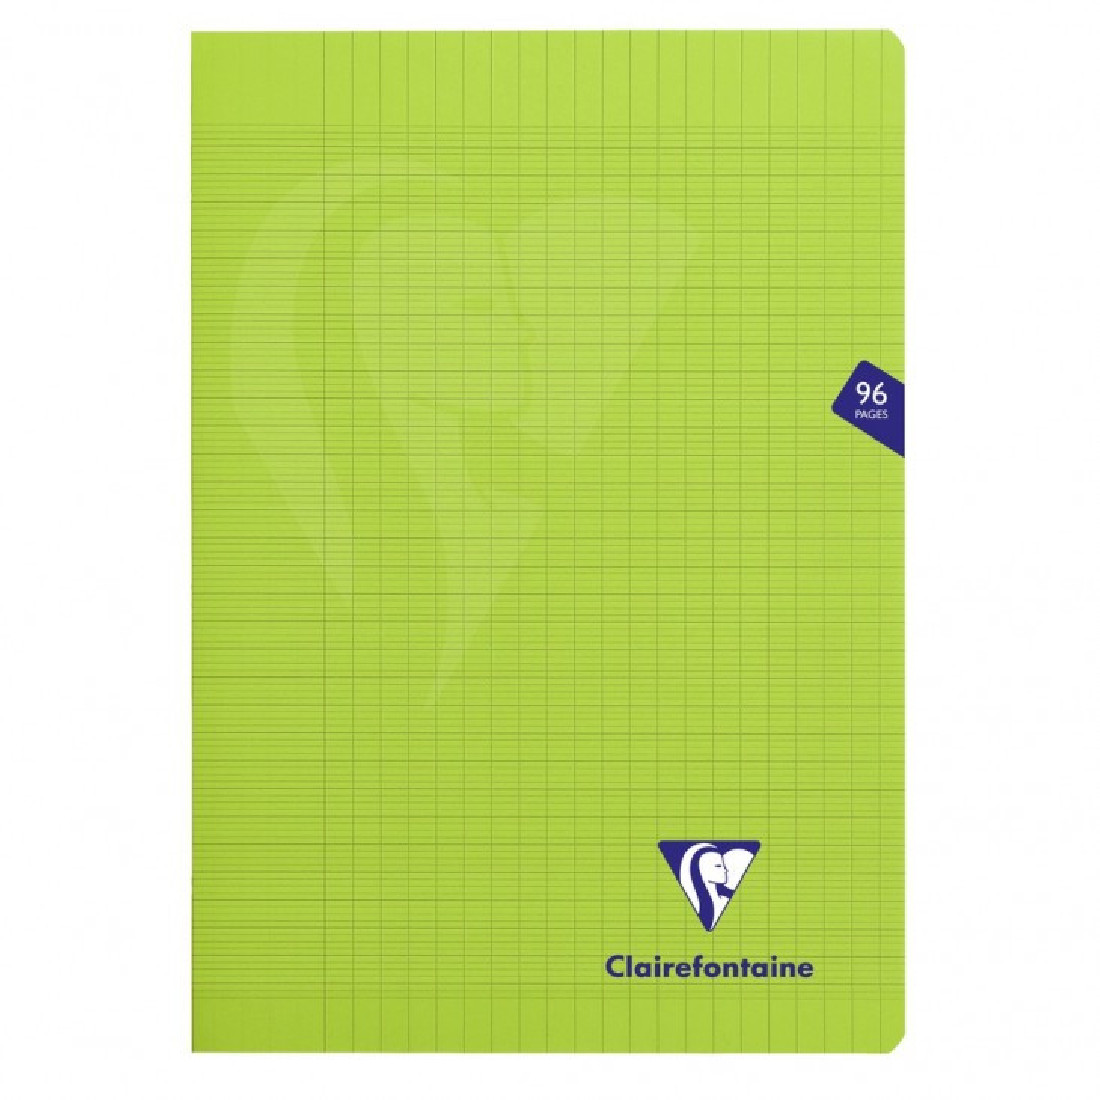 Clairefontaine A4 cahier green lined with margin 96 pages 90g